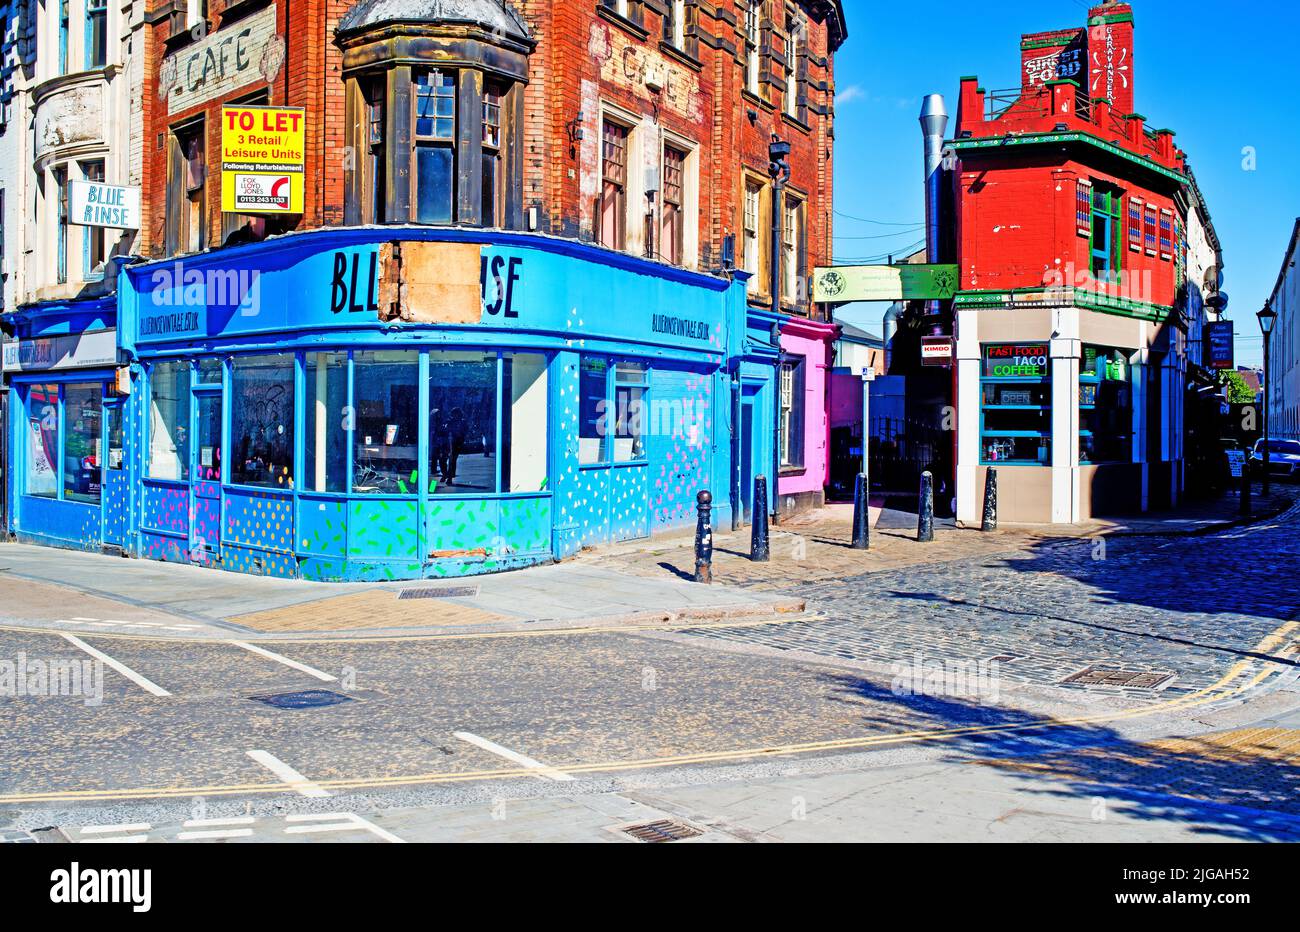 Vintage Clothing Shop and Coffee House, Call Lane, Leeds, Inghilterra Foto Stock